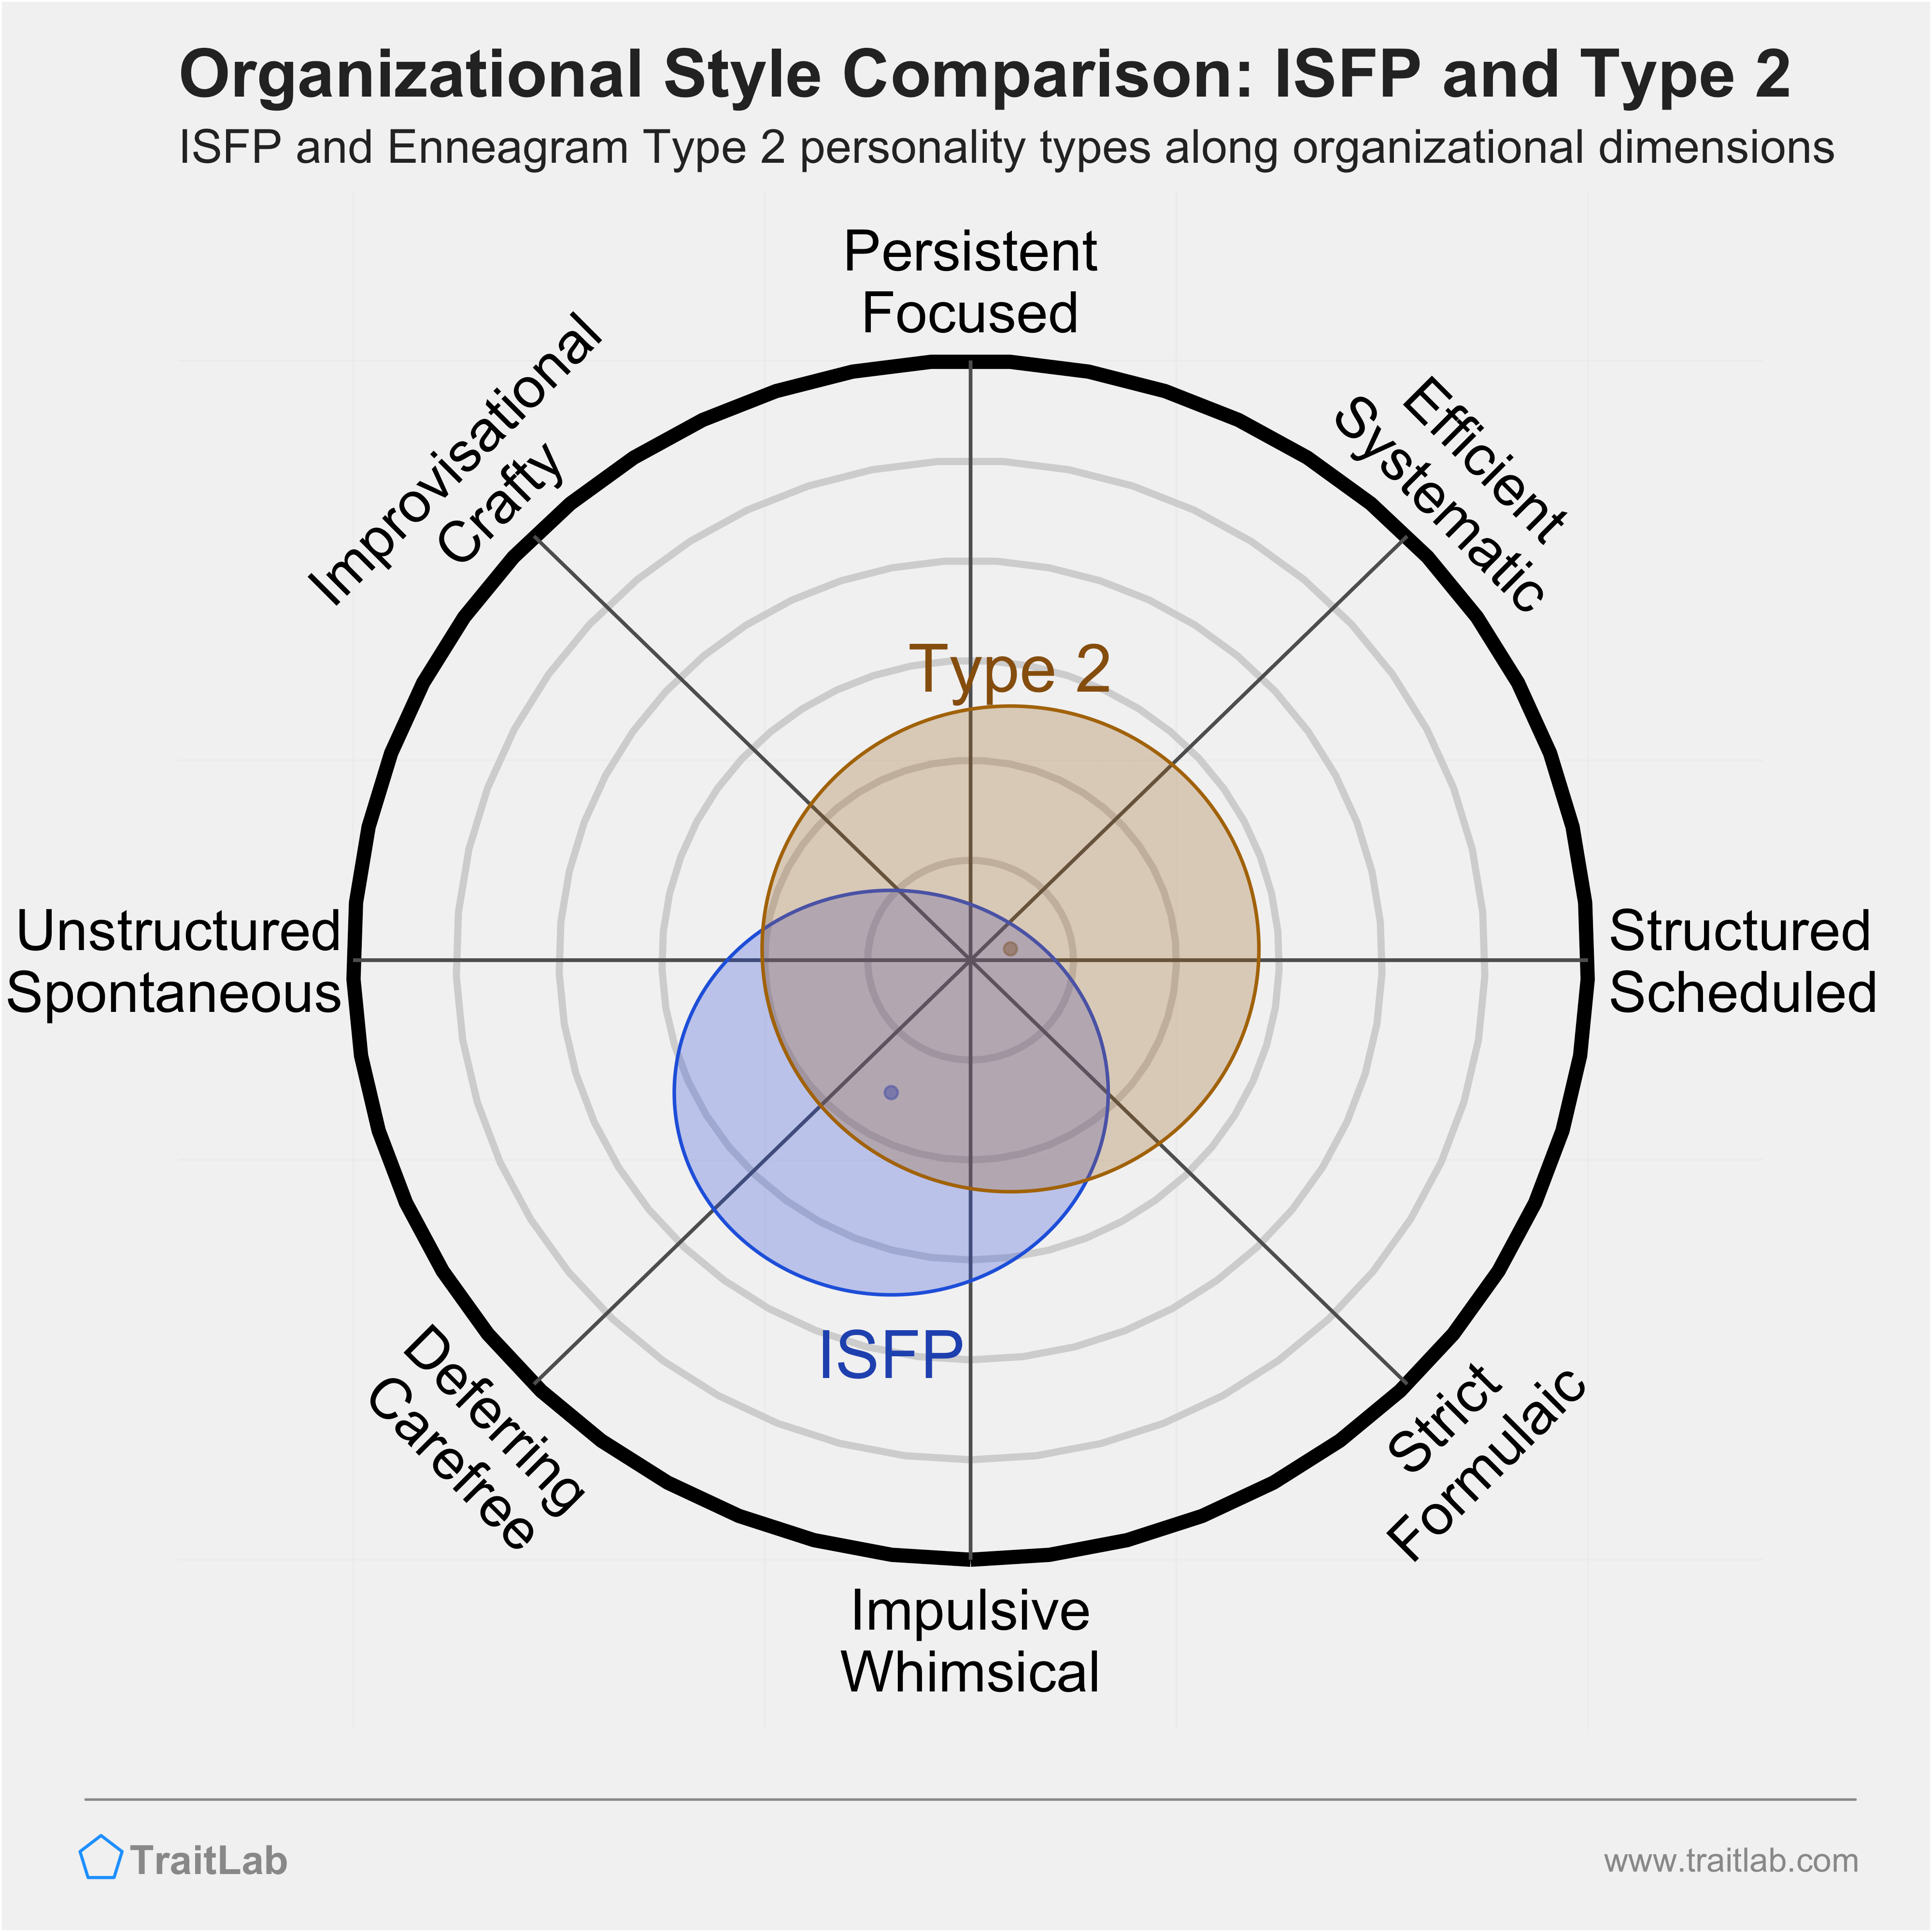 ISFP and Type 2 comparison across organizational dimensions